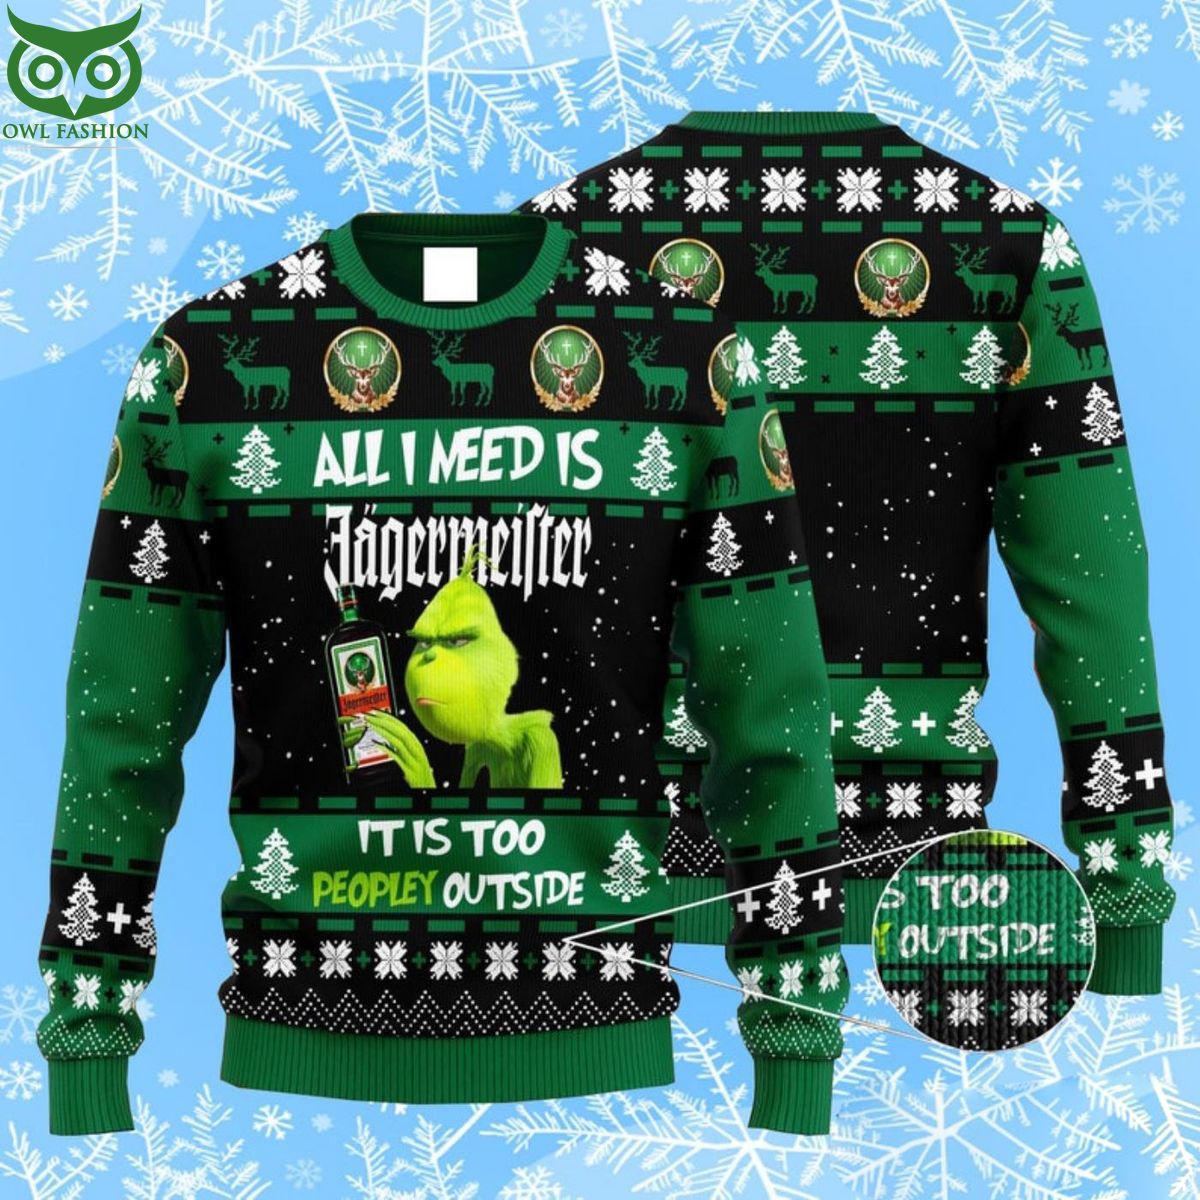 all grinch need is green jagermeister people outside christmas ugly sweater 1 iSDUx.jpg